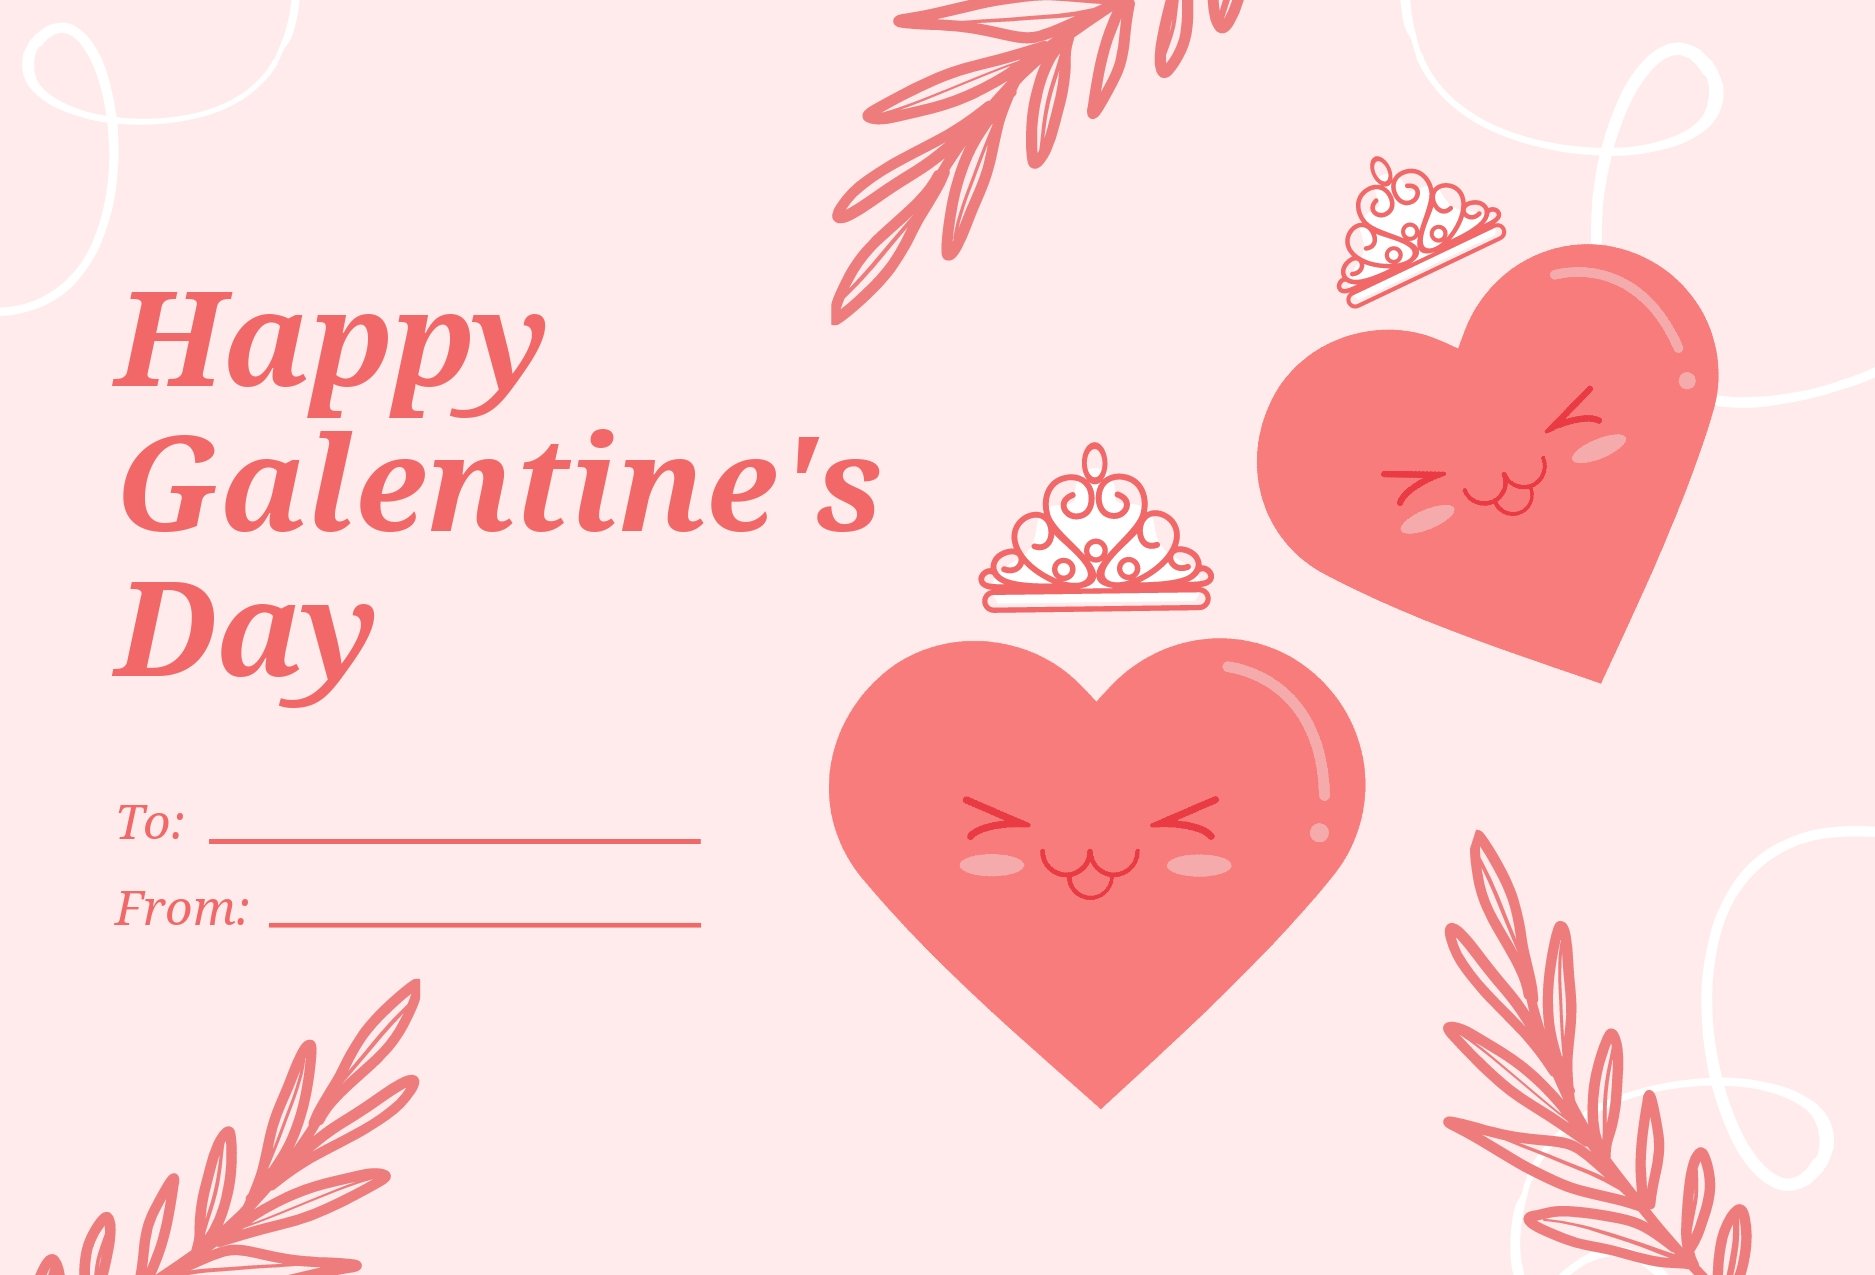 free-galentine-s-day-card-templates-examples-edit-online-download